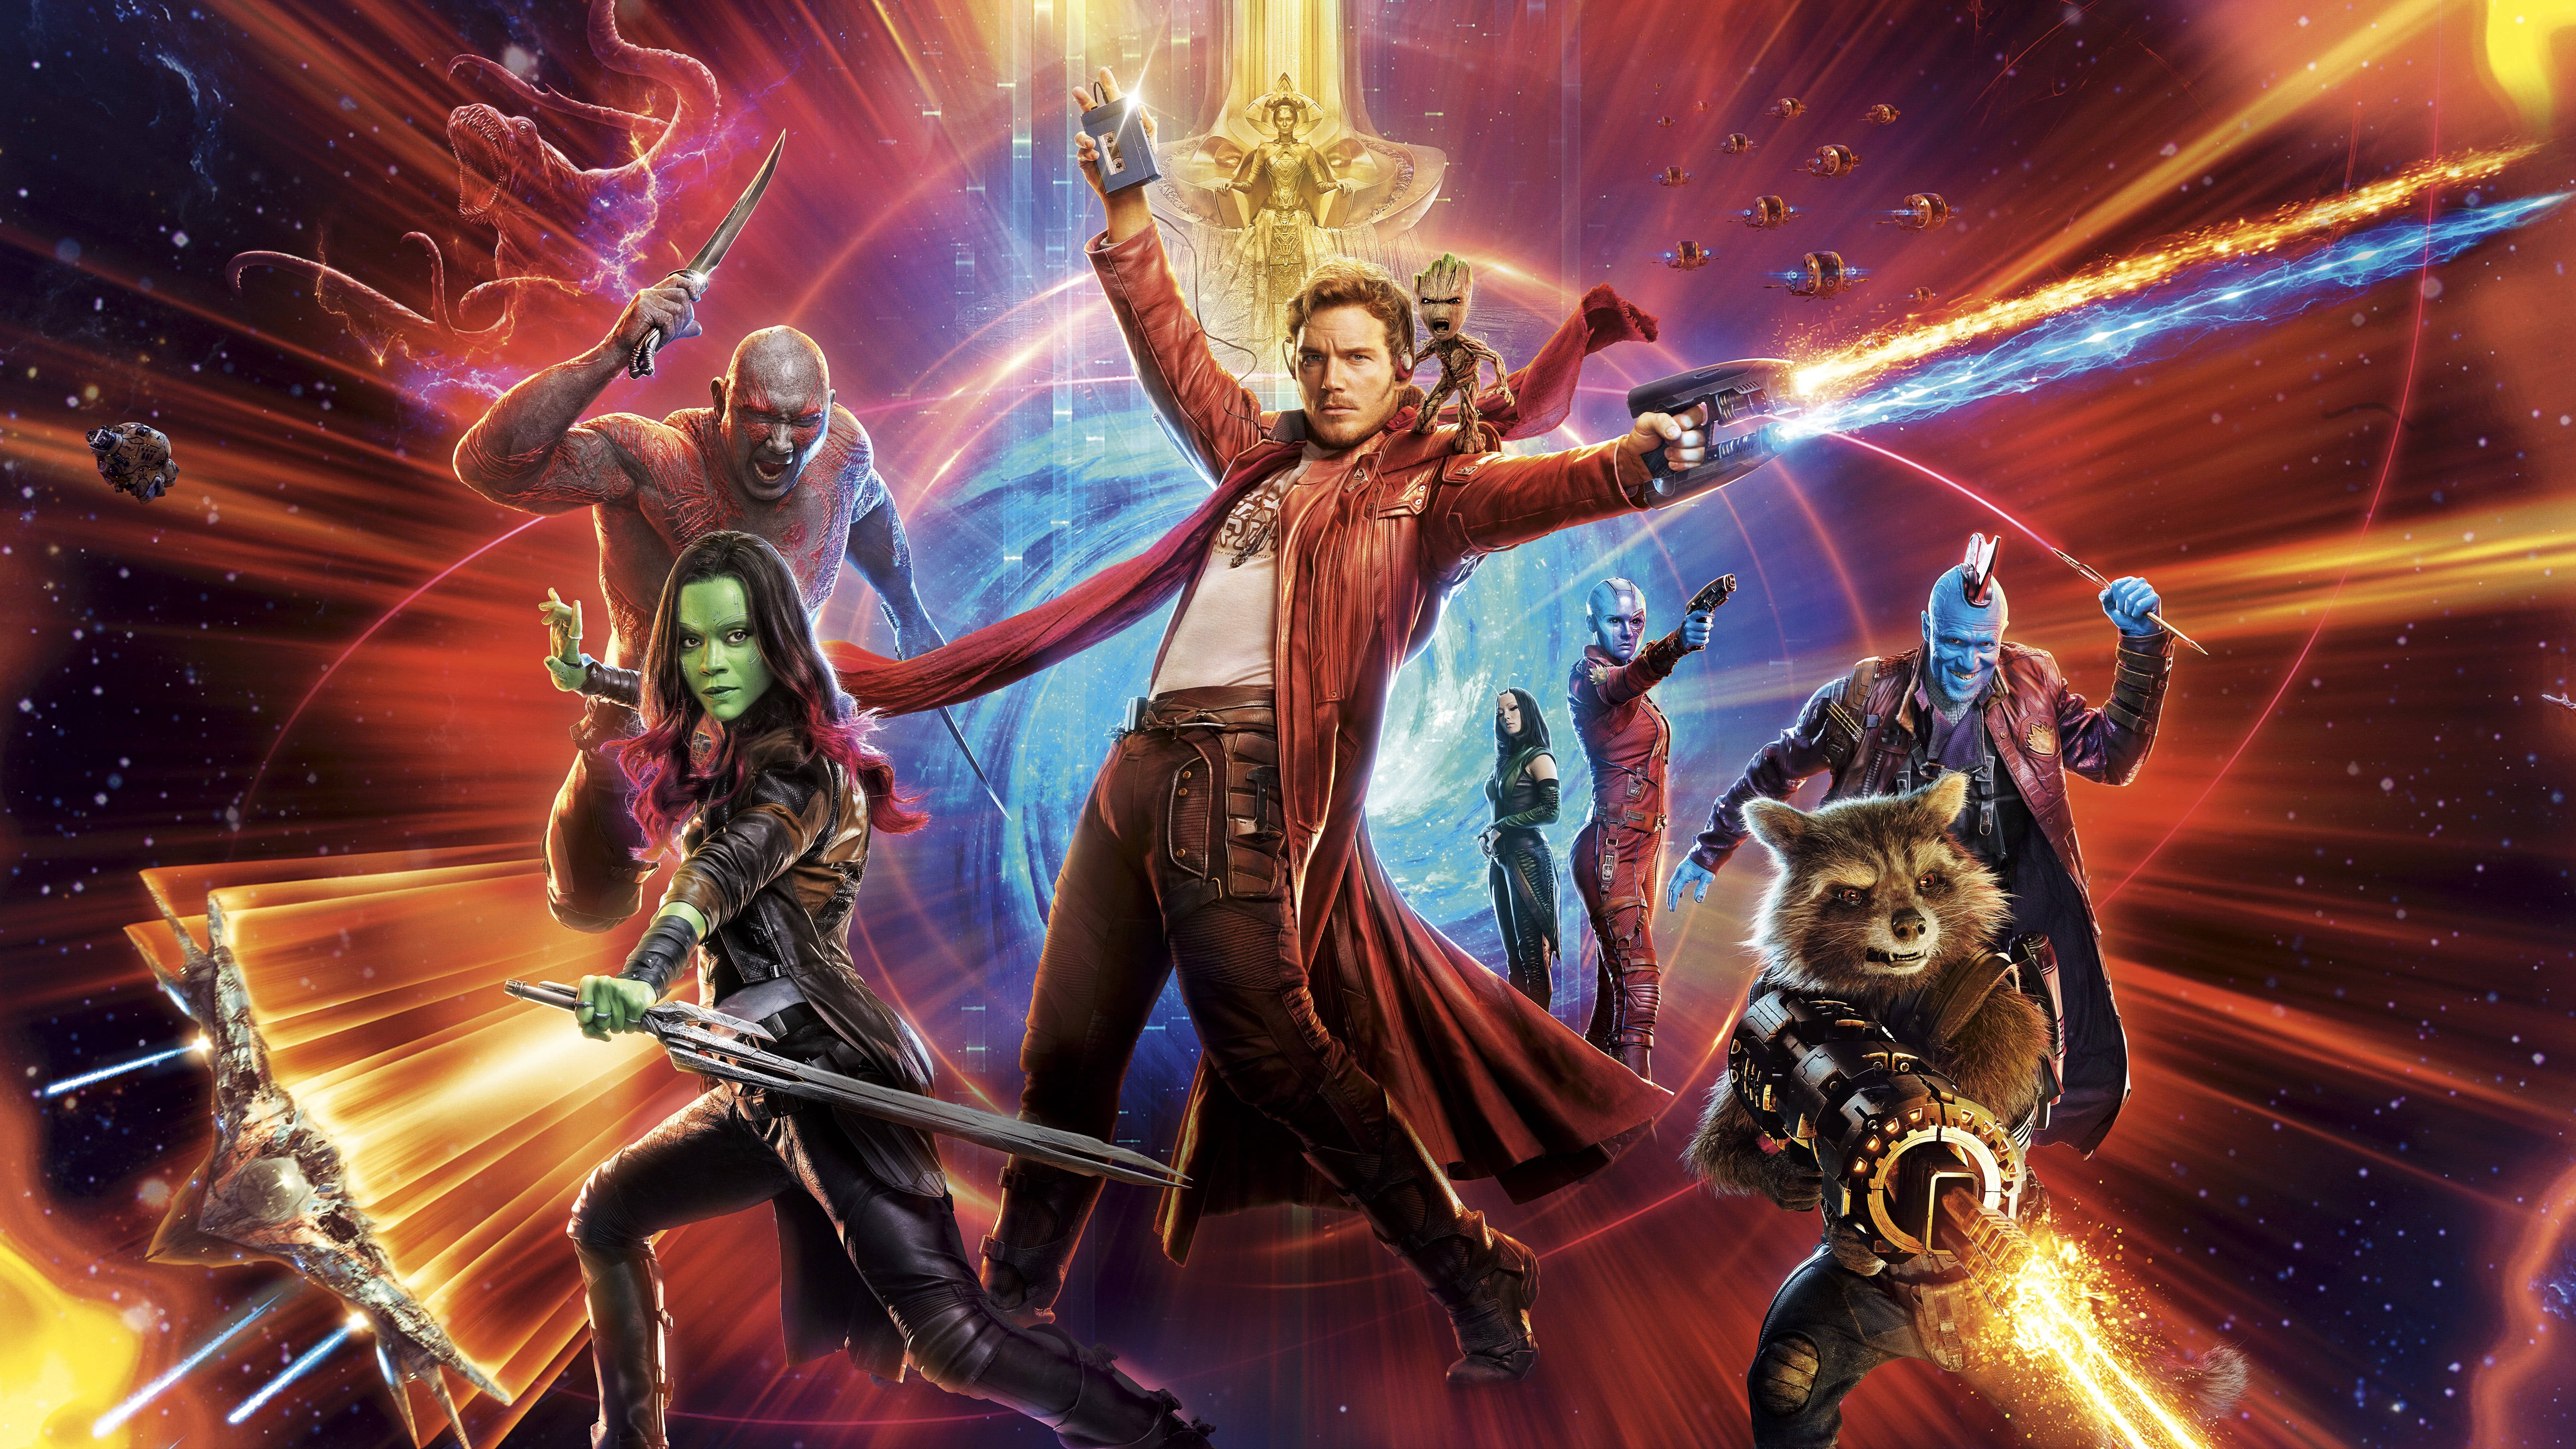 Guardians of the galaxy vol 2 wallpaper 69 images - Guardians of the Galaxy